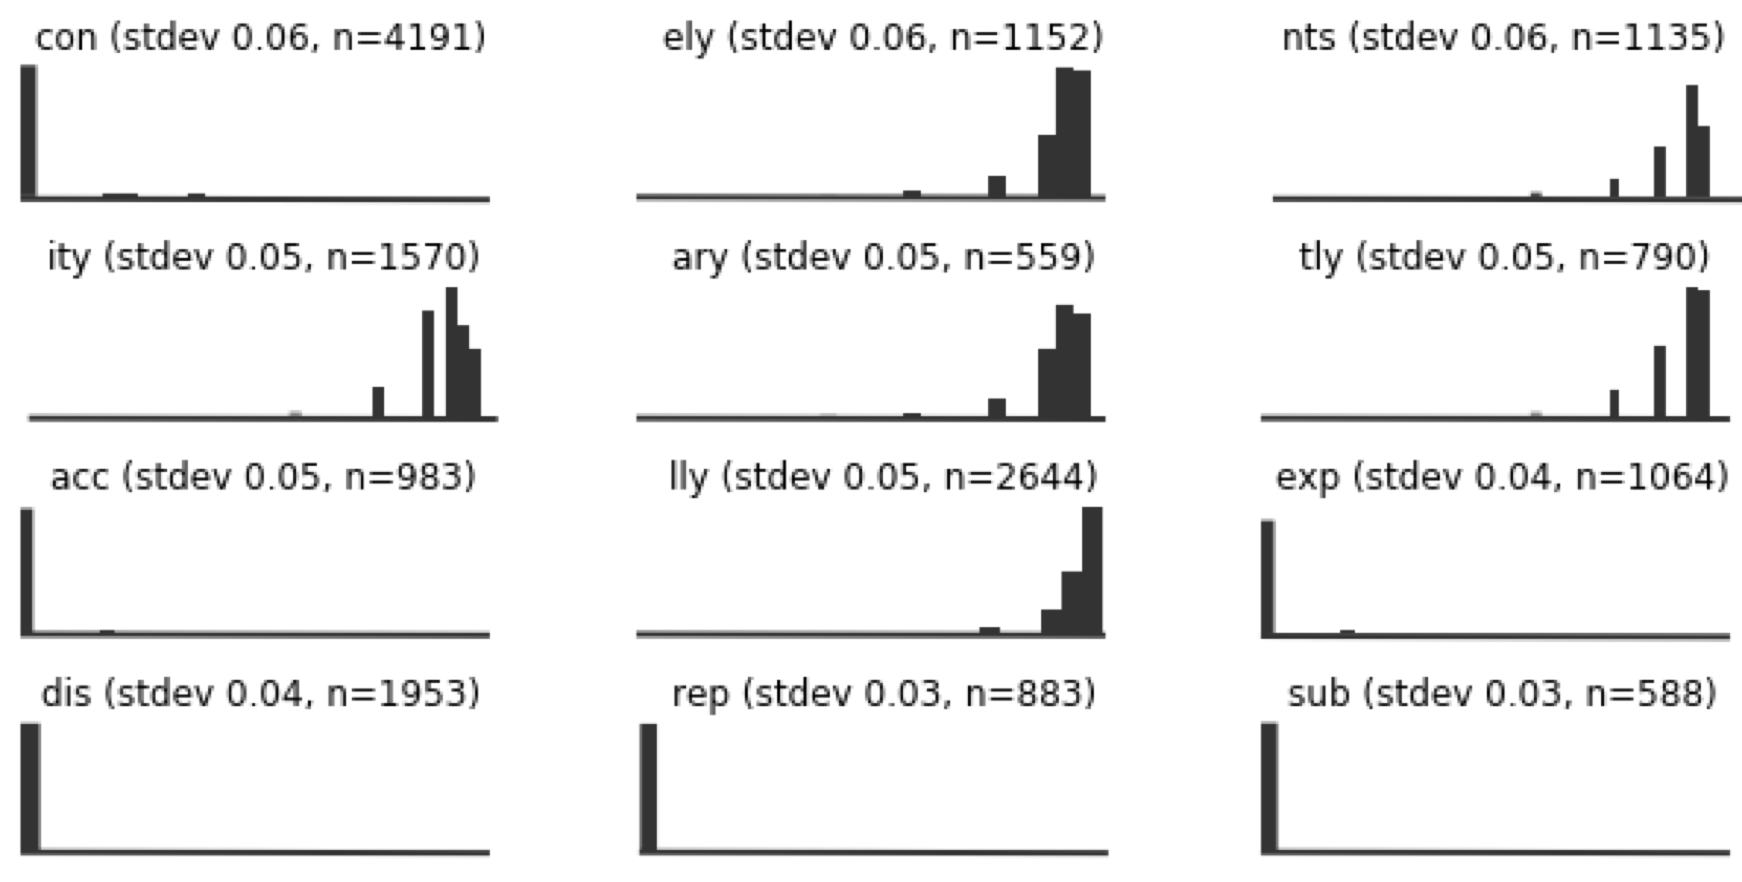 More histograms labelled with letter sequences